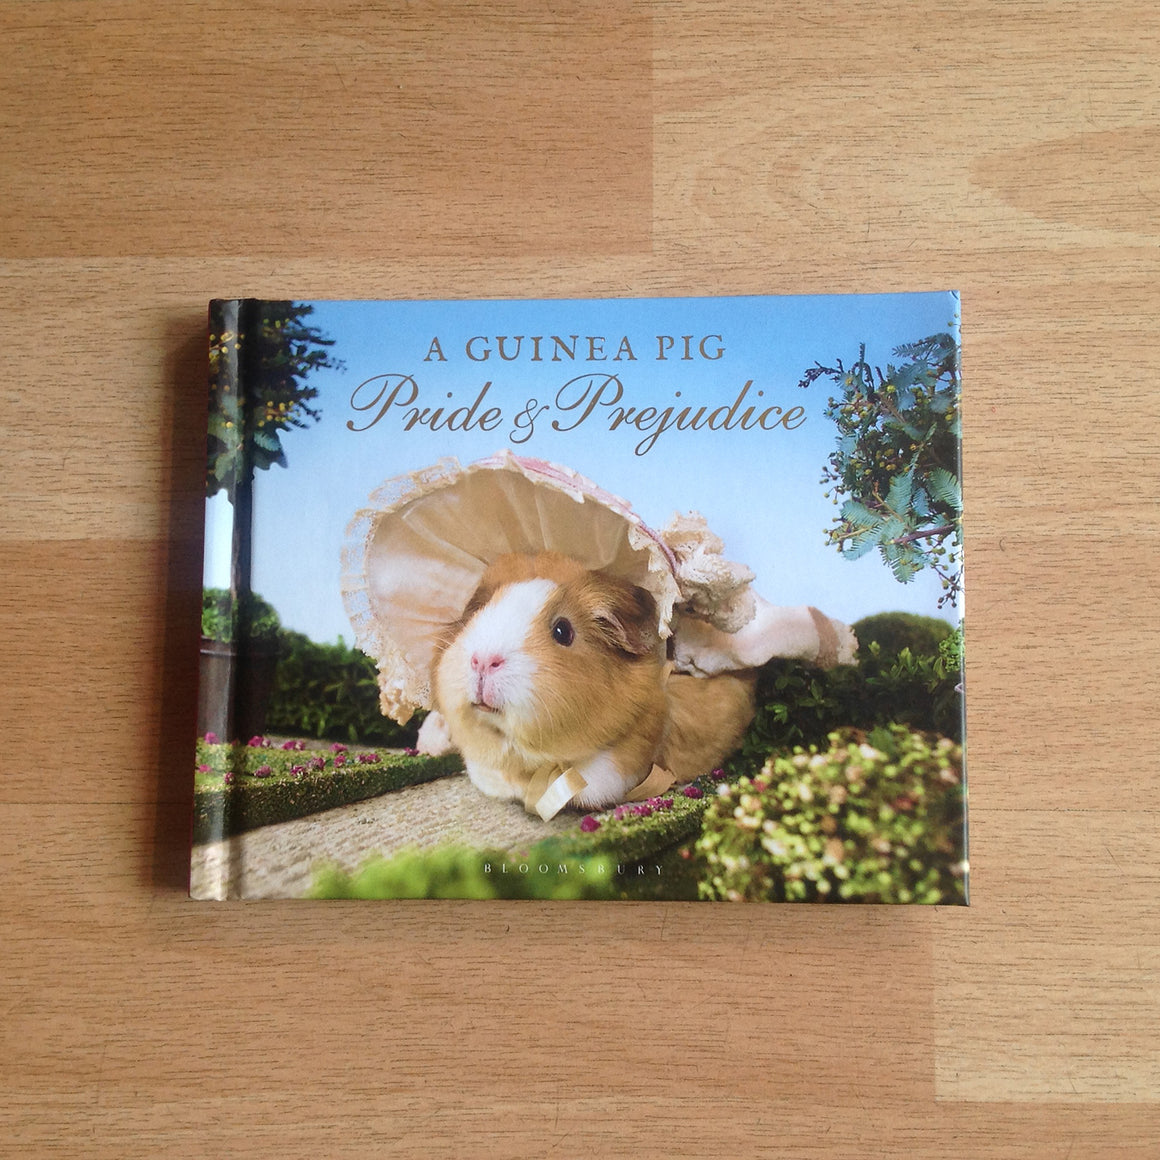 guinea pig gifts, the classic jane austen story re-told with